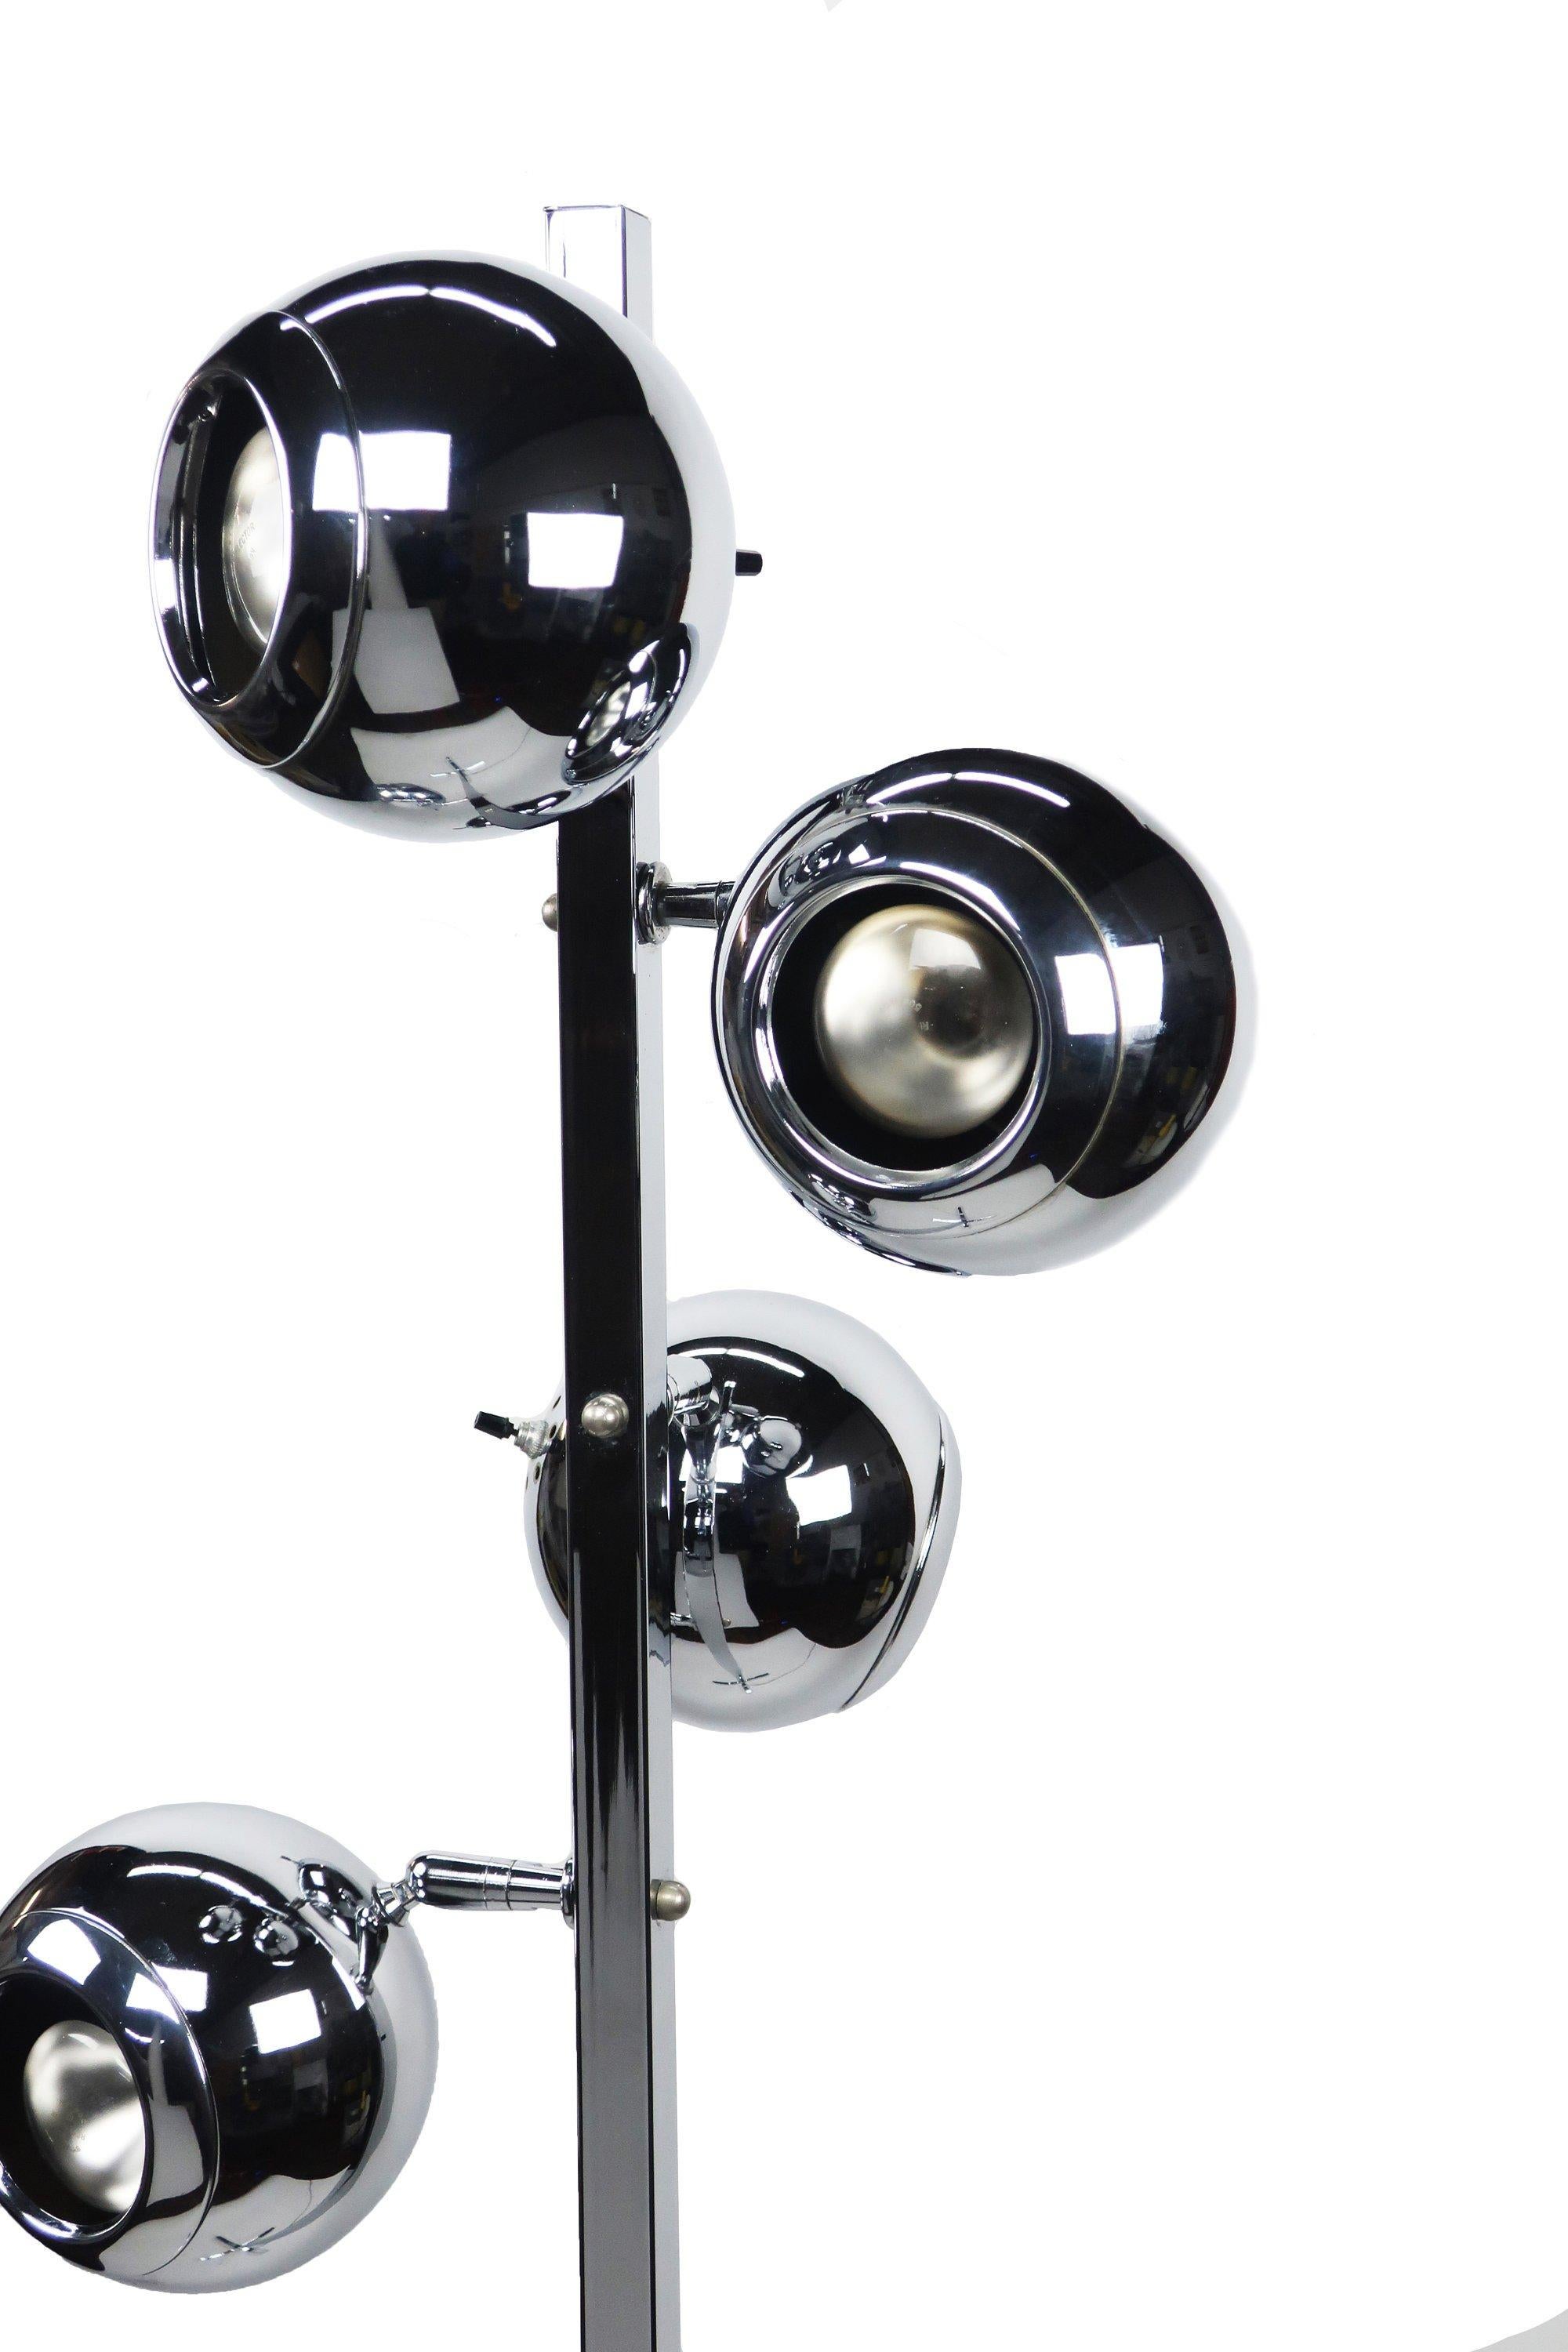 A vintage Mid-Century Modern chrome eyeball floor lamp in the style of Robert Sonneman/George Kovacs or Koch & Lowy, circa 1960s. It features four independently adjustable chrome globe lights on a central chrome stem and base. Each “eyeball” has its